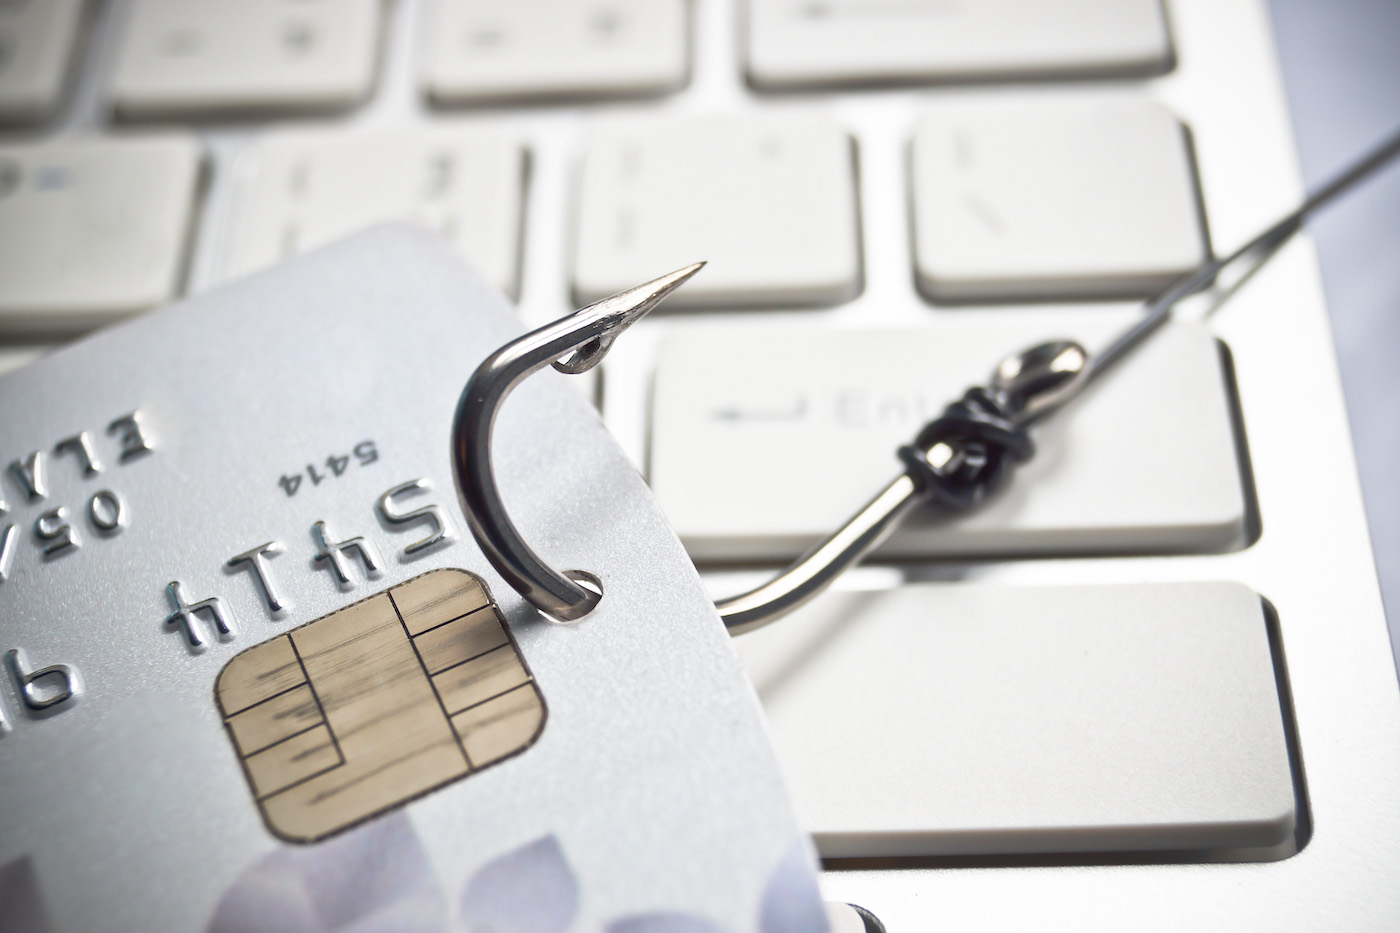 Fish hook hooked onto a credit card on a computer keyboard, representing phishing and the importance of cyber security